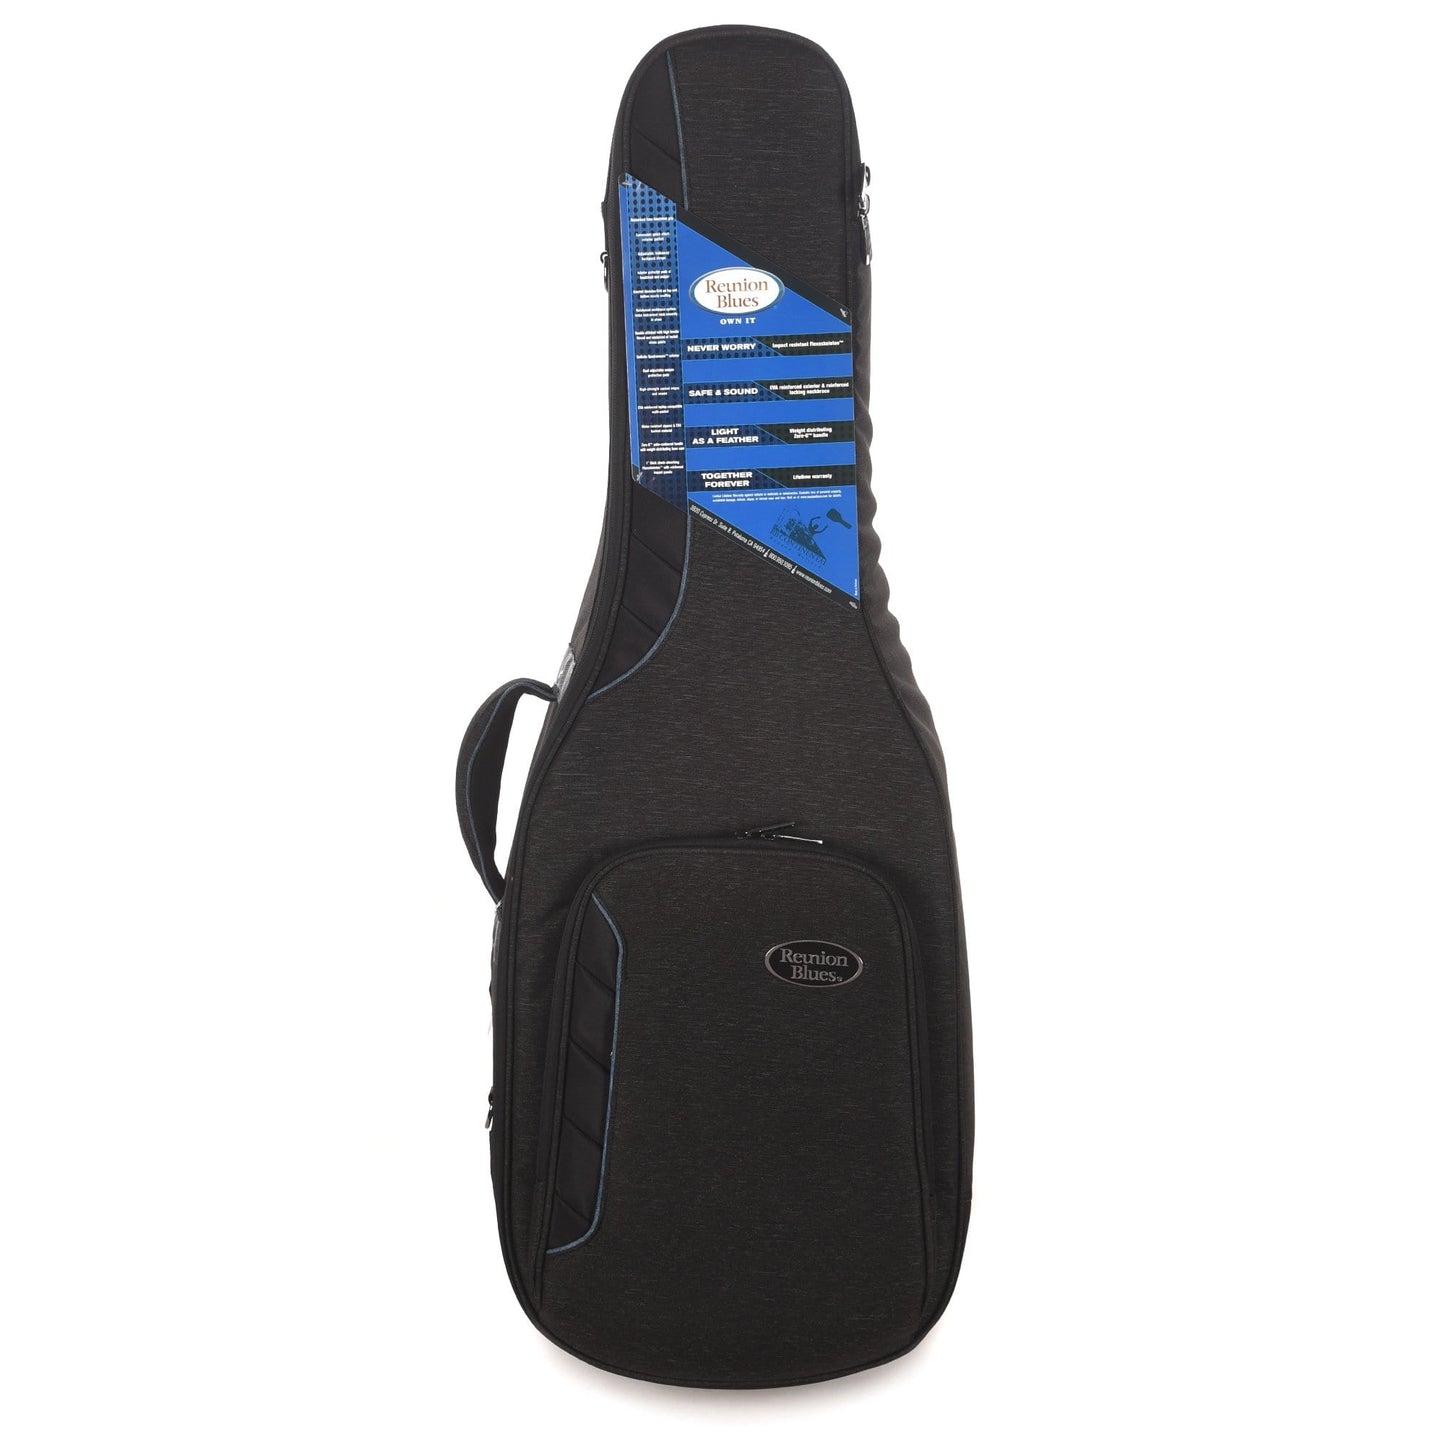 Reunion Blues Continental Voyager Double Electric Guitar Case Accessories / Cases and Gig Bags / Guitar Cases